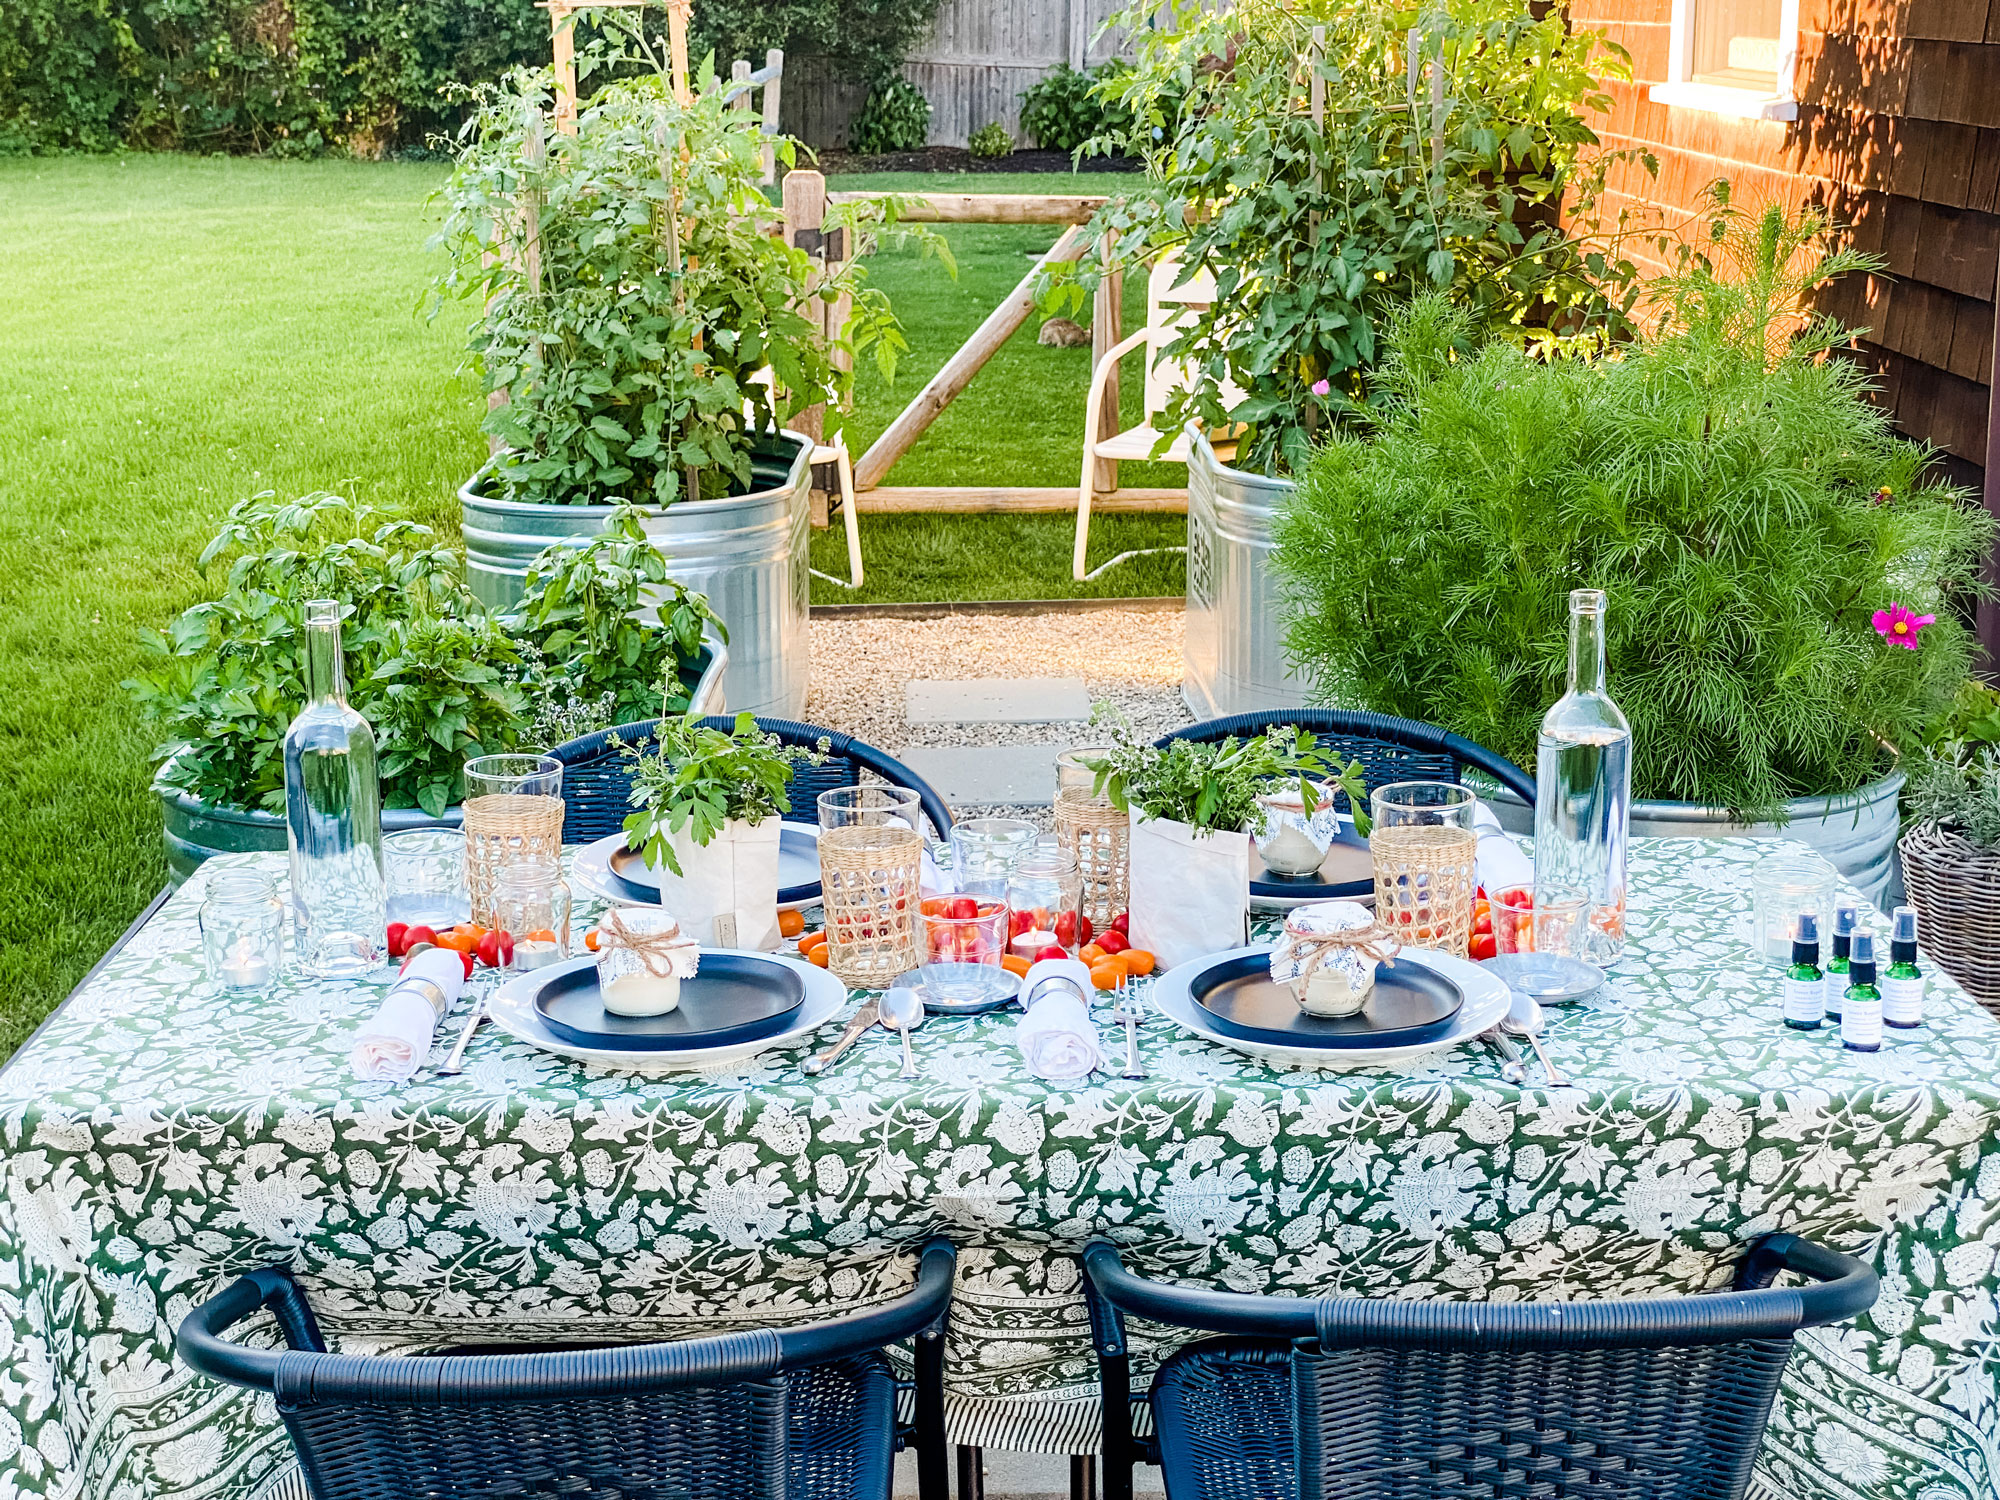 Tips for hosting a simple dinner in the garden | Most Lovely Things